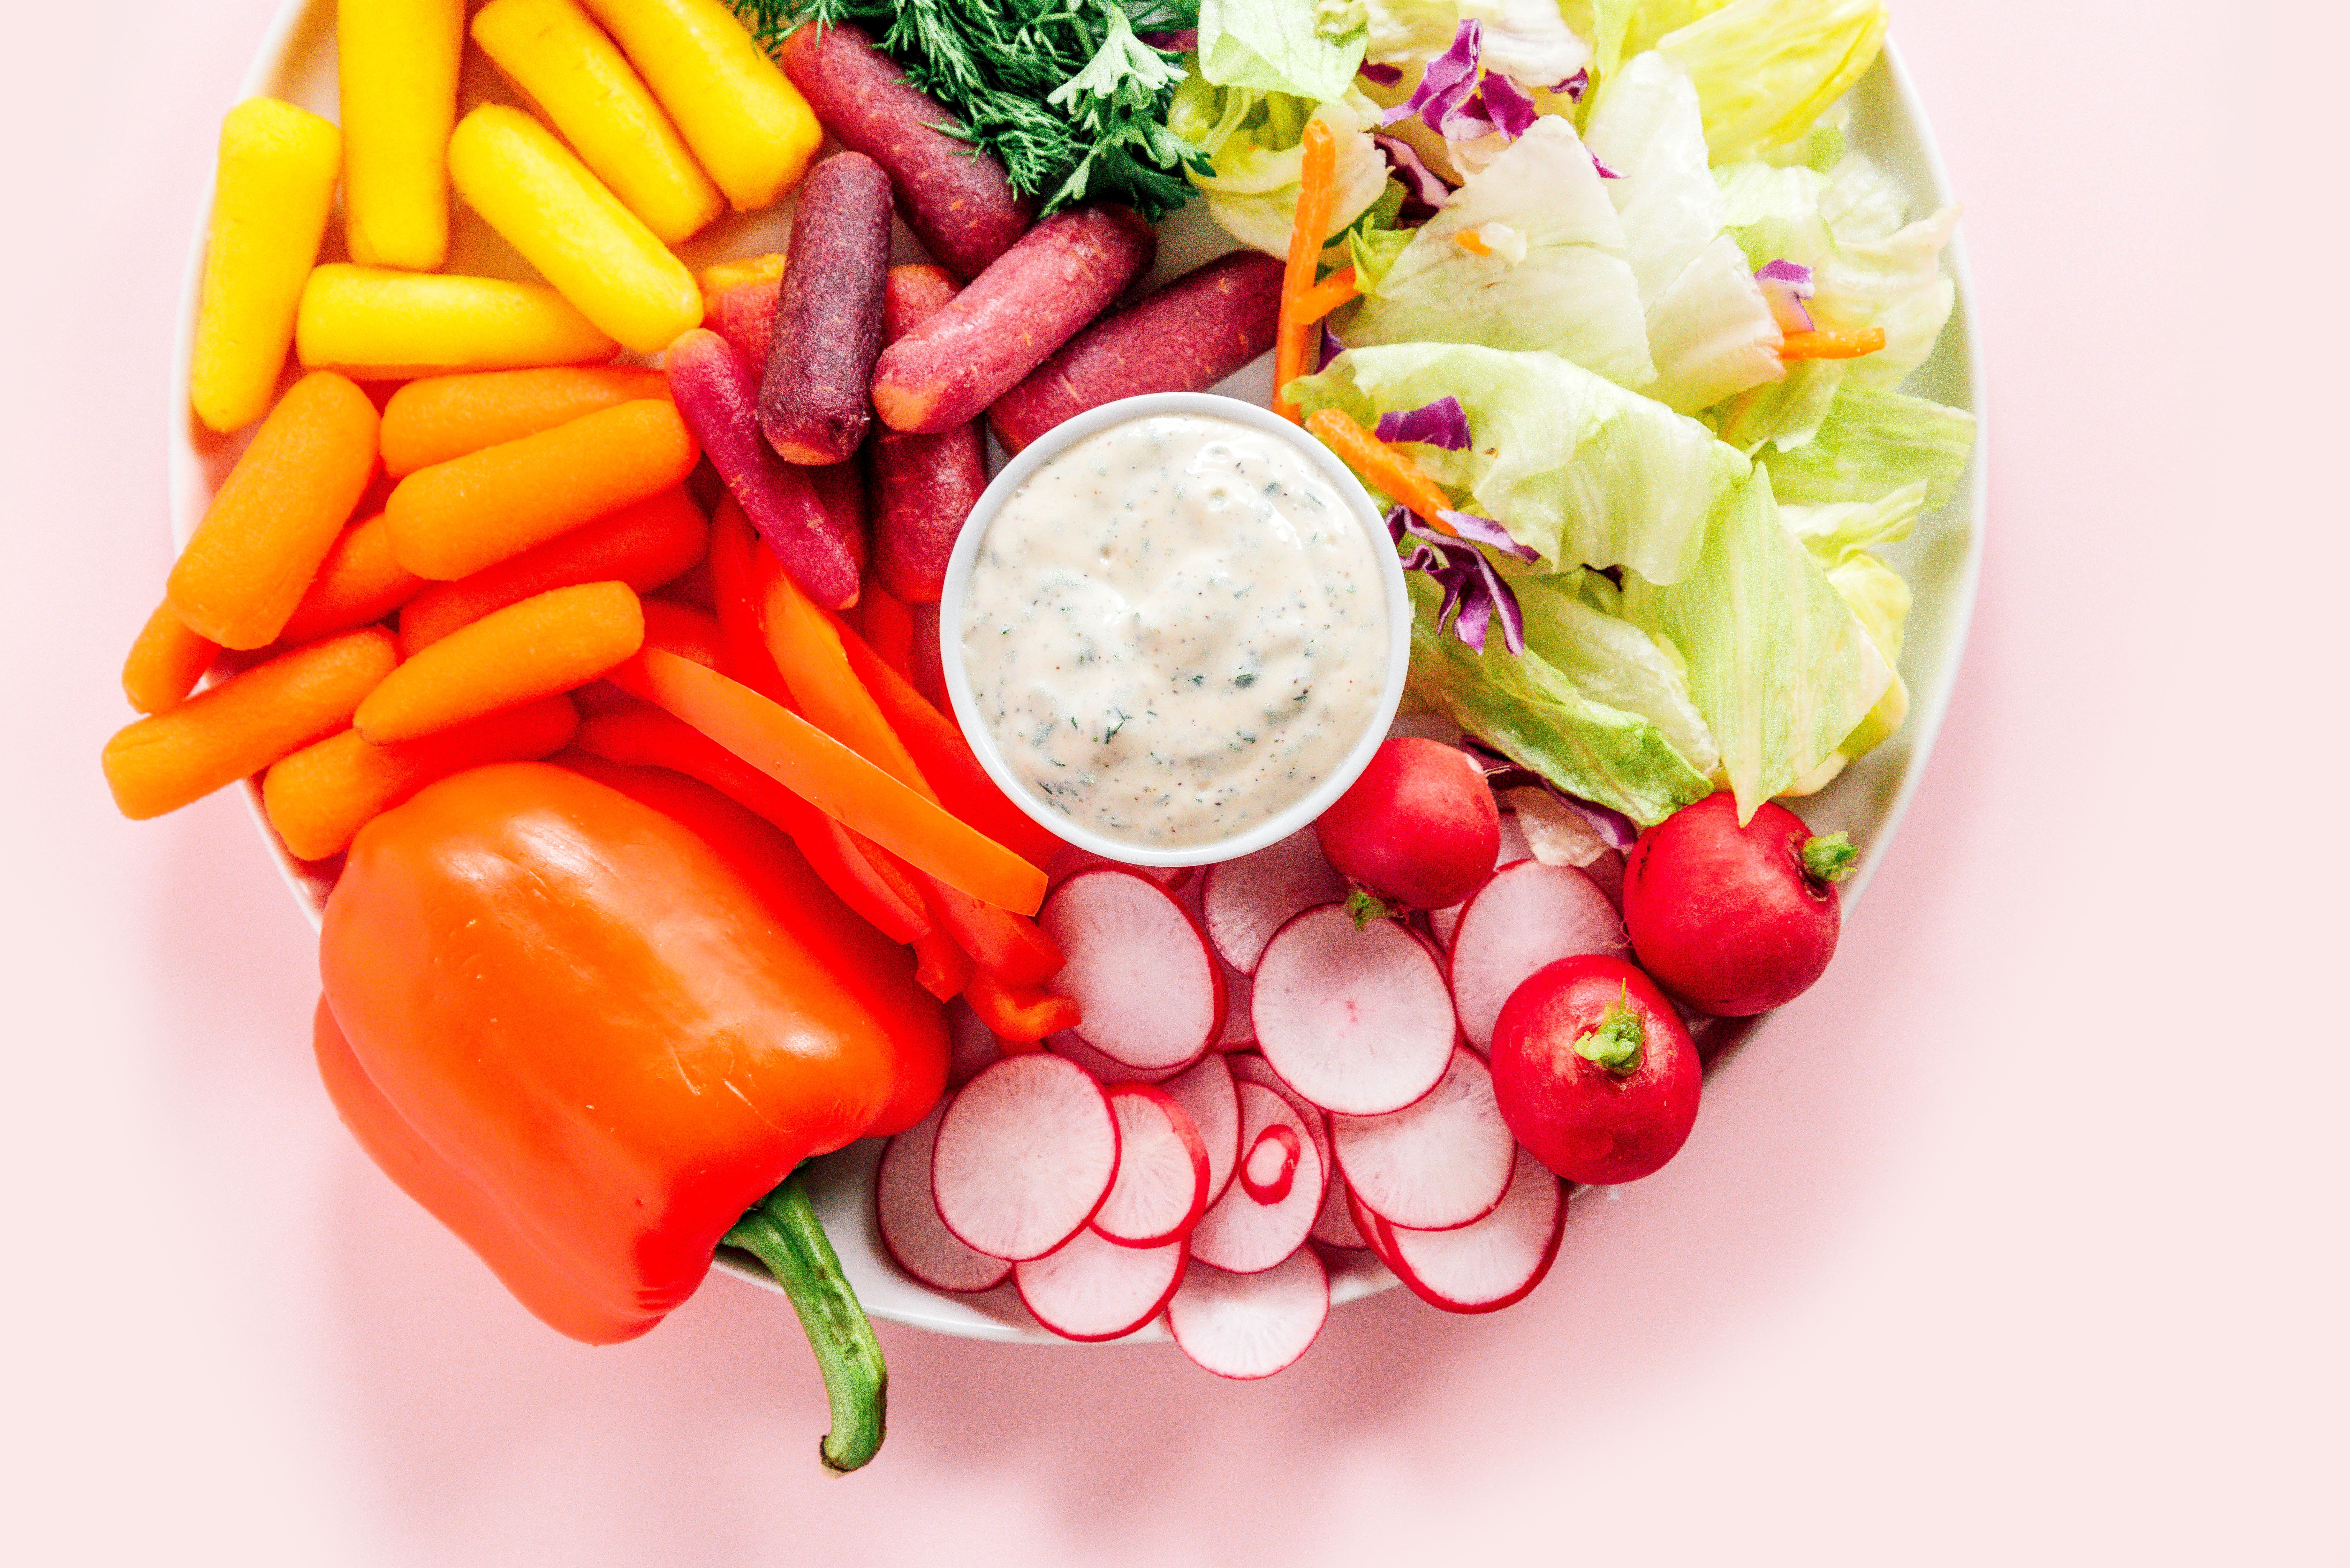 A platter filled with a bowl of homemade ranch dressing surrounded by veggies like peppers, carrots, radishes, lettuce, and more